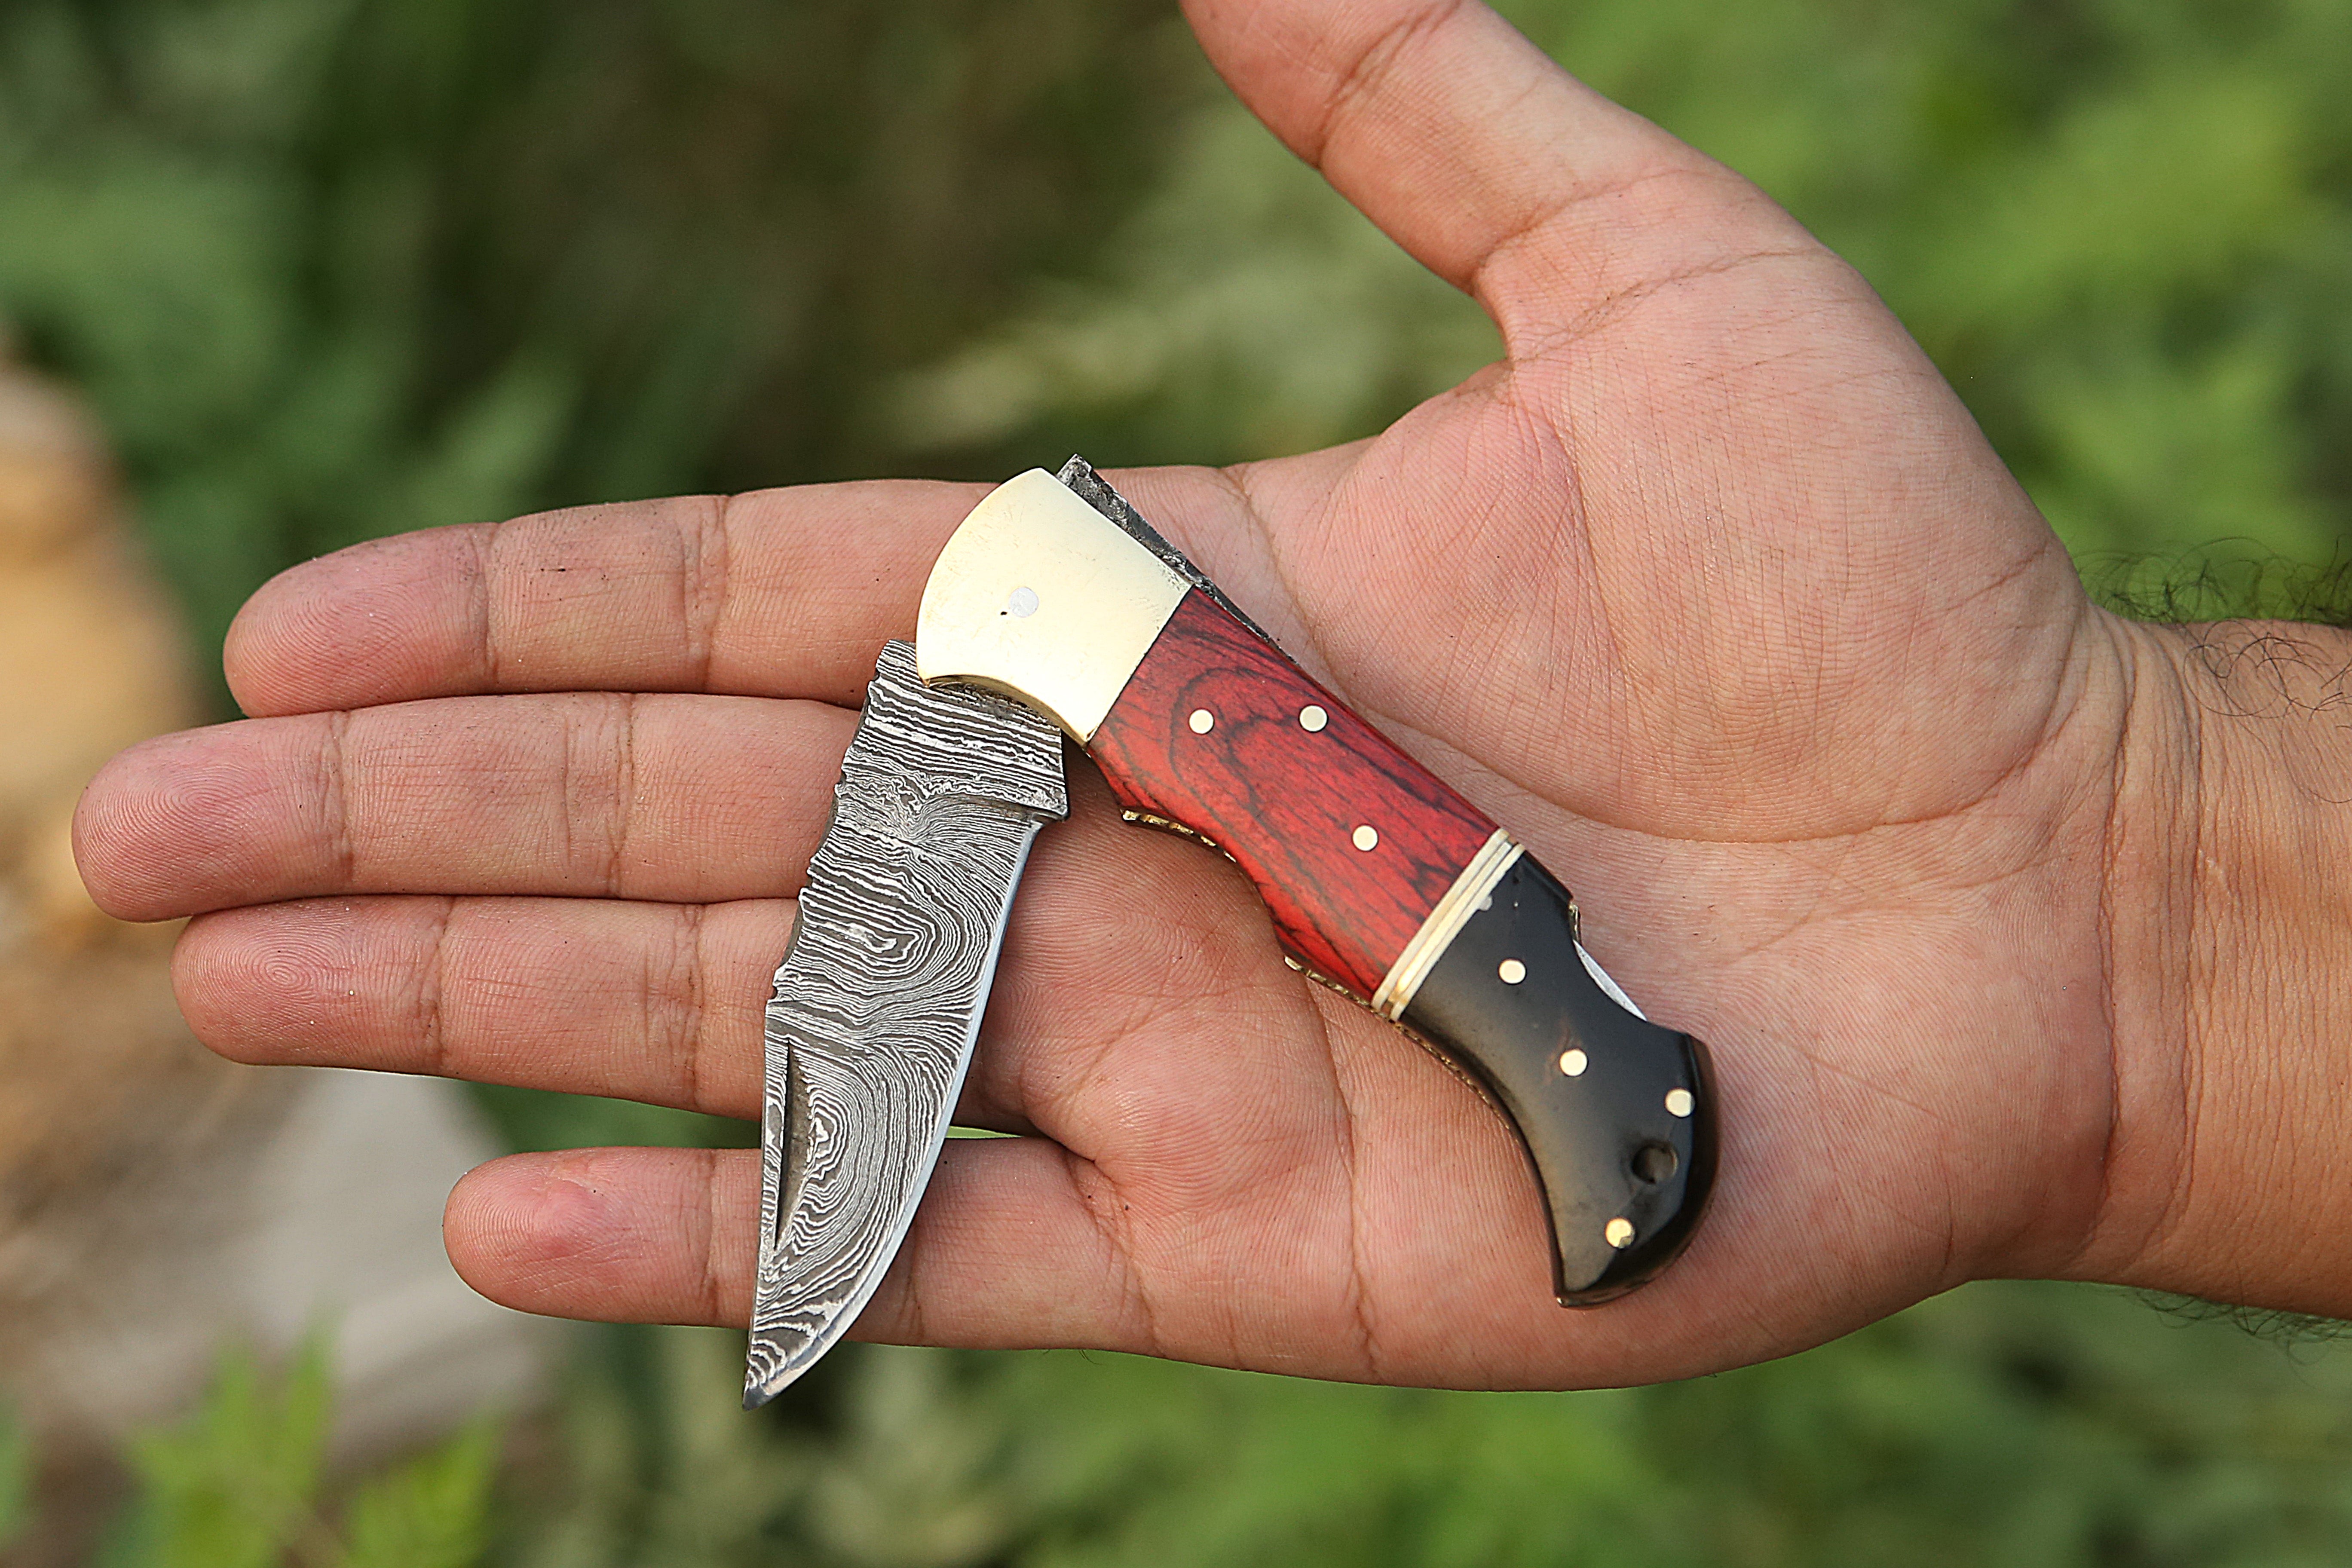 Personalized Gift Black Horn Handmade Damascus Steel Pocket Knife Red Dollar Sheet Handle Folding Knife With Cow Leather Sheath.